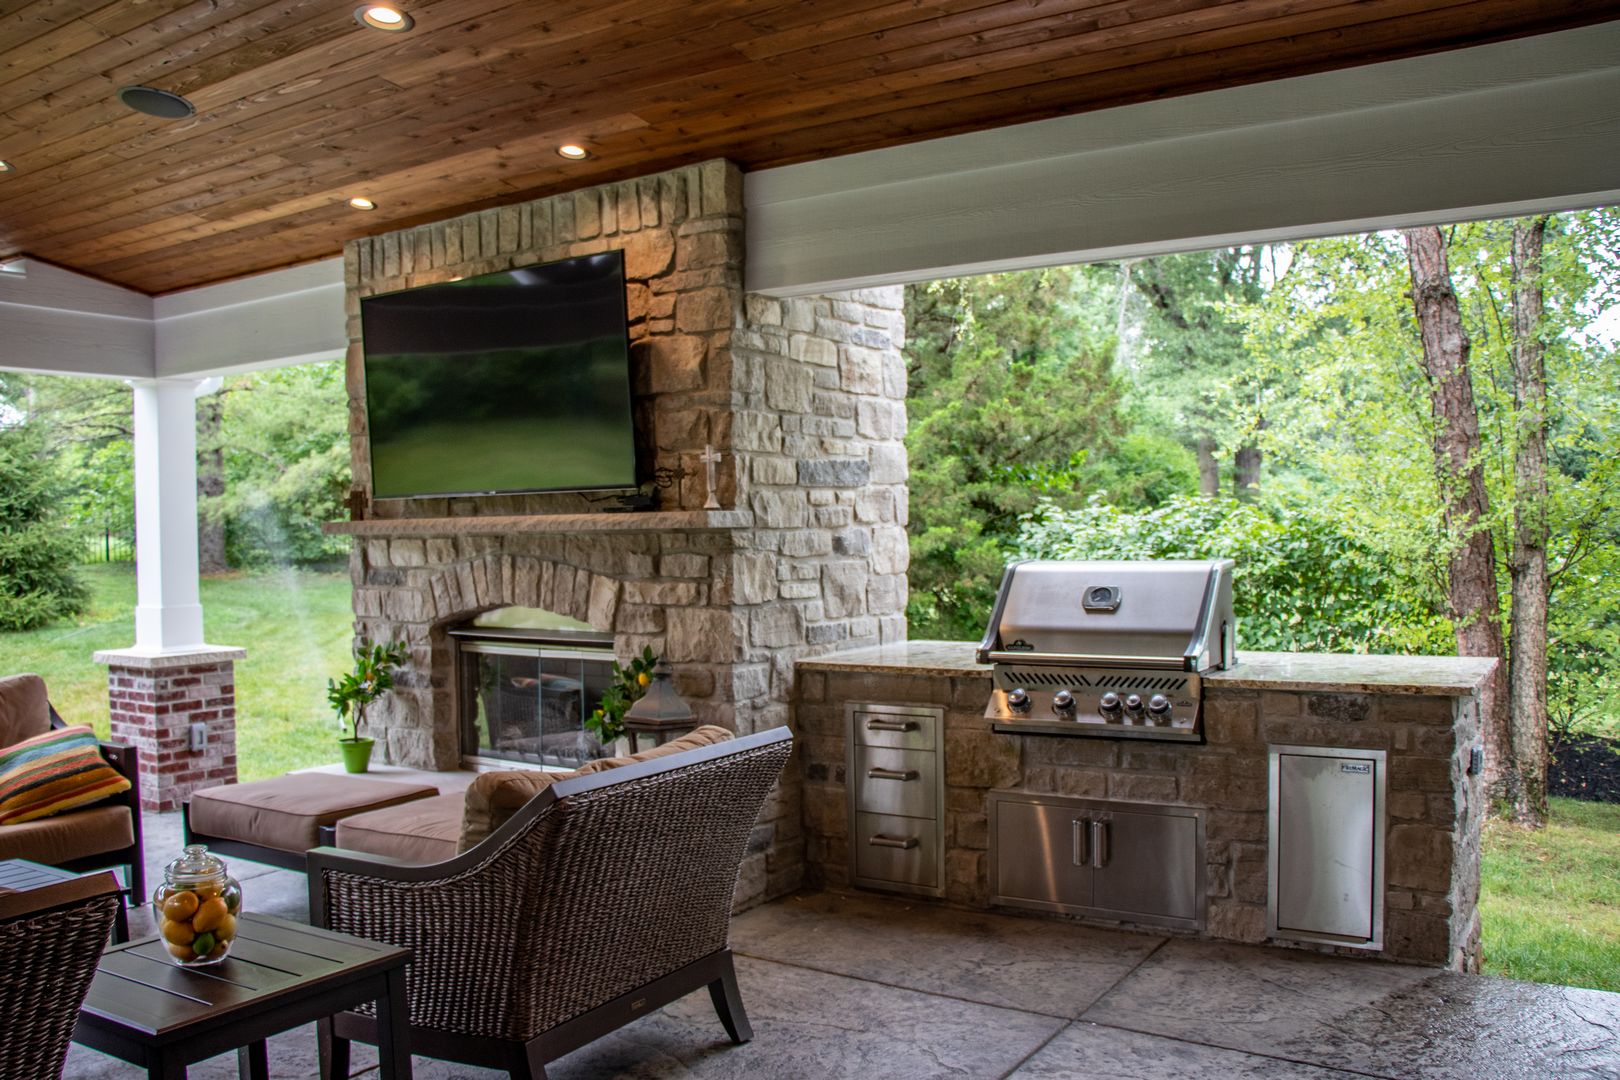 Outdoor kitchen next to a fireplace